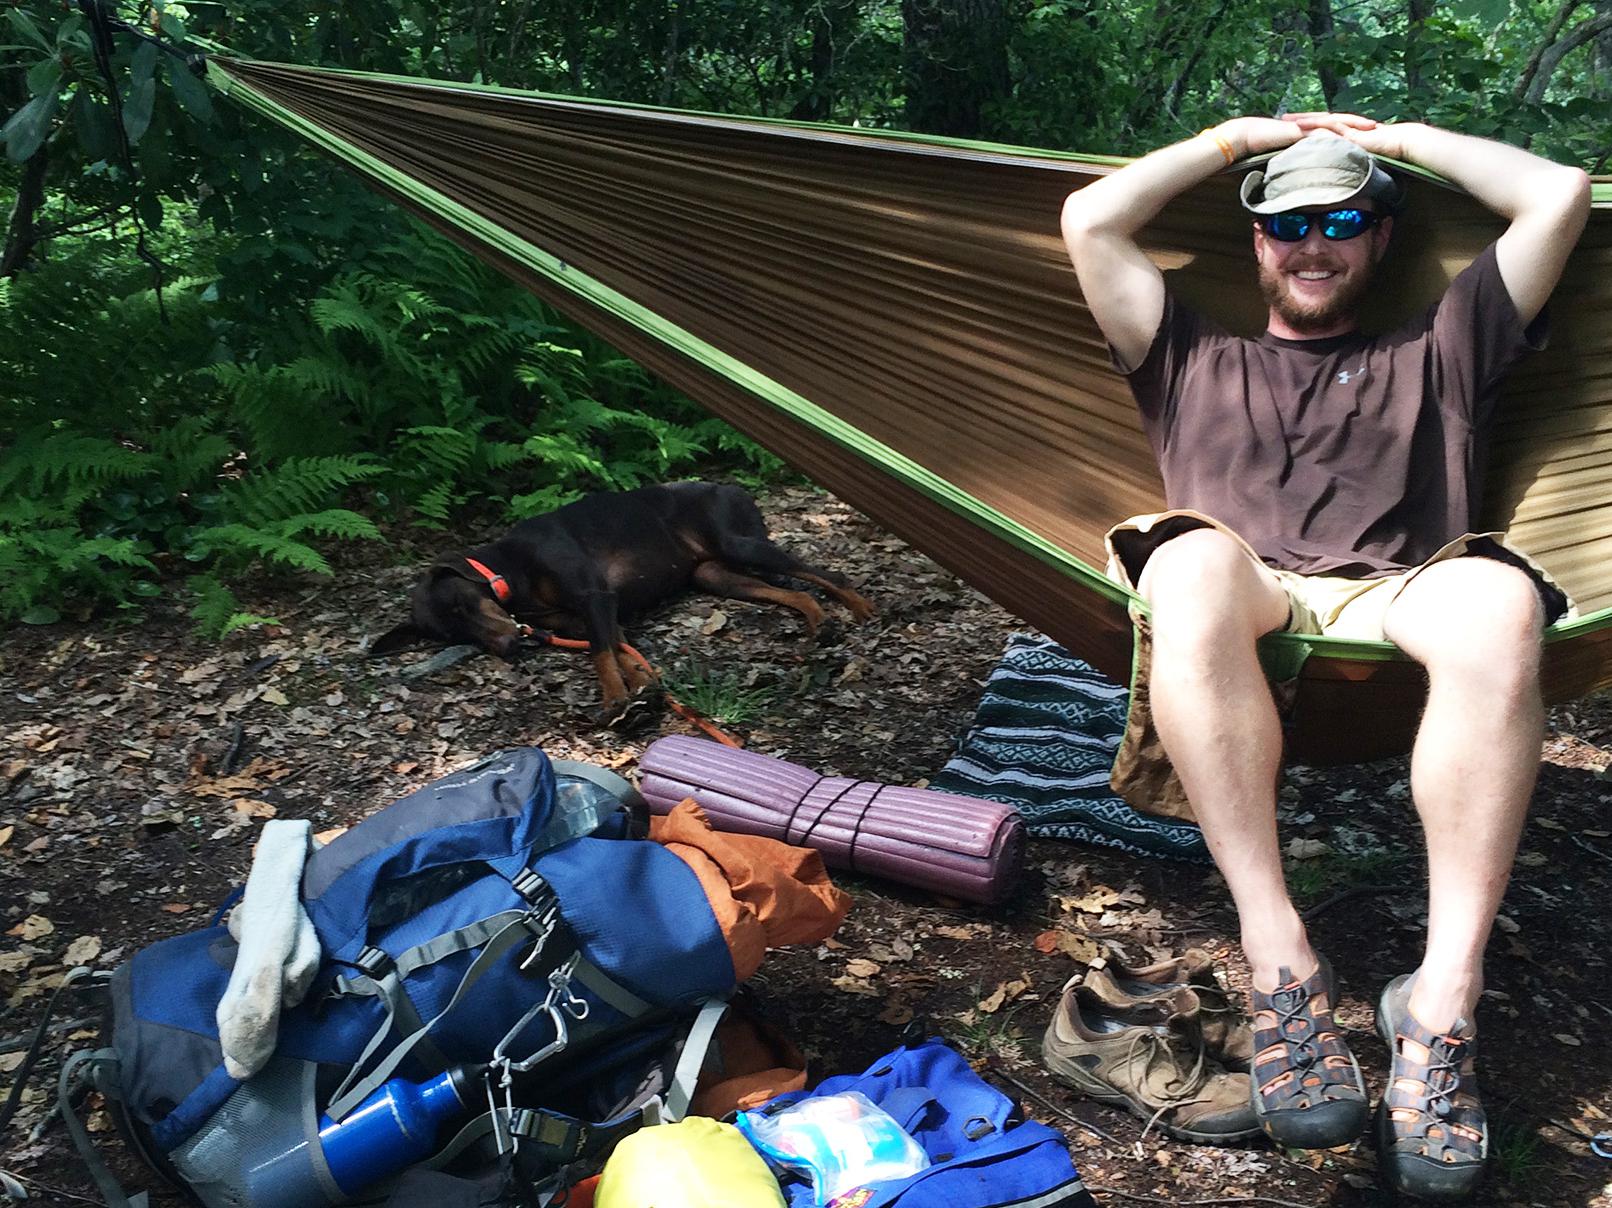 Hammocks offer great resting spots whether the excursion is a day trip or an overnighter. (Photo by MSU Extension Service)